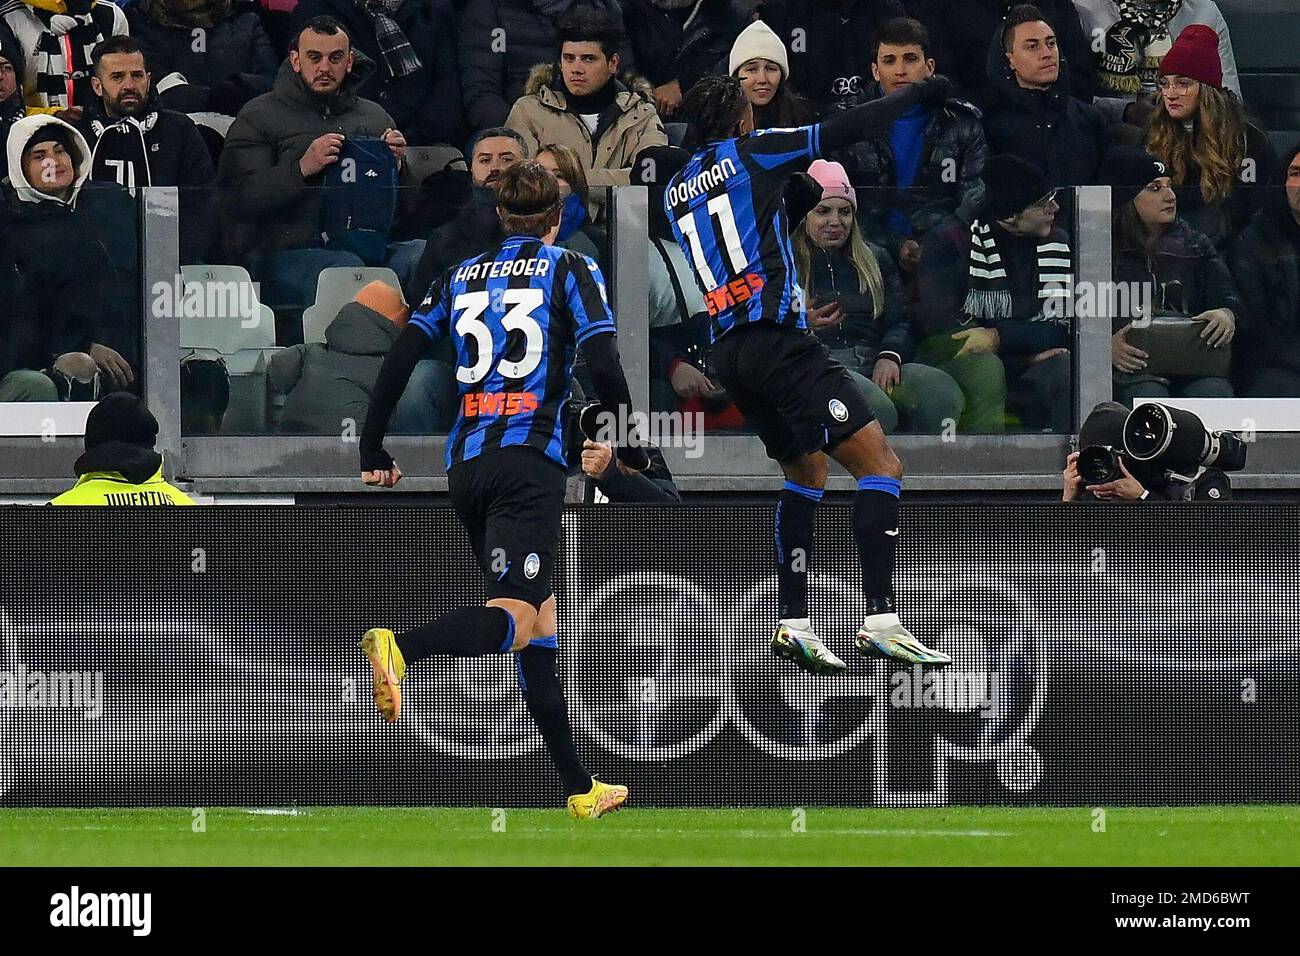 Torino, Italy. 22nd Jan, 2023. Ademola Lookman of Atalanta BC celebrates after scoring the goal of 0-1 during the Serie A football match between Juventus FC and Atalanta BC at Juventus stadium in Torino (Italy), January 22th, 2022. Photo Giuliano Marchisciano/Insidefoto Credit: Insidefoto di andrea staccioli/Alamy Live News Stock Photo